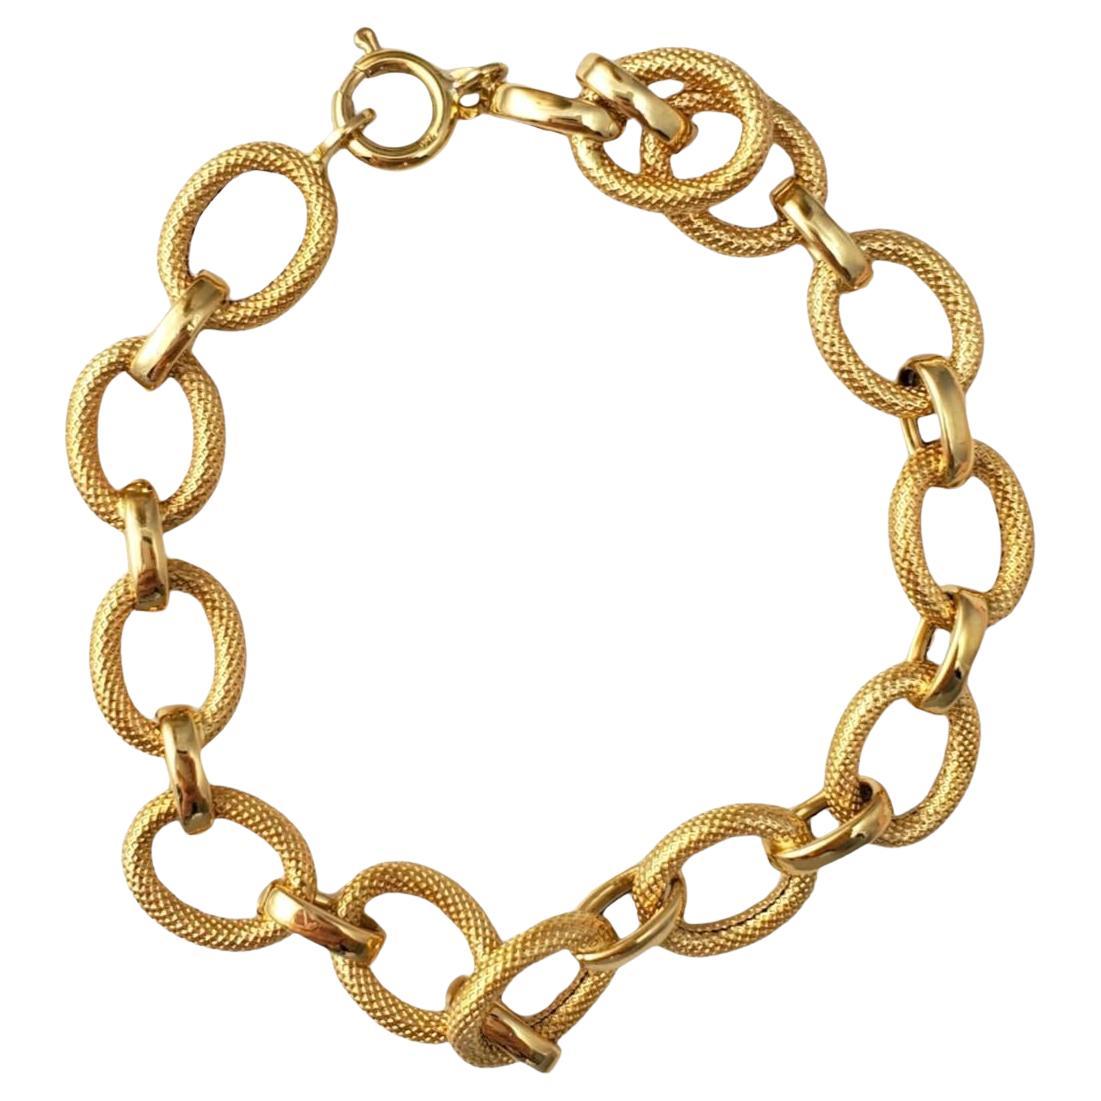 Vintage 18K Yellow Gold Link Chain Bracelet- 

This stylish accessory features chic interlocked links. 

Bracelet length: 7 Inches

Approx. 9mm wide

Weight:  4.8 dwt. /  7.47 gr.

Stamped 750

Very good condition, professionally polished.

Will